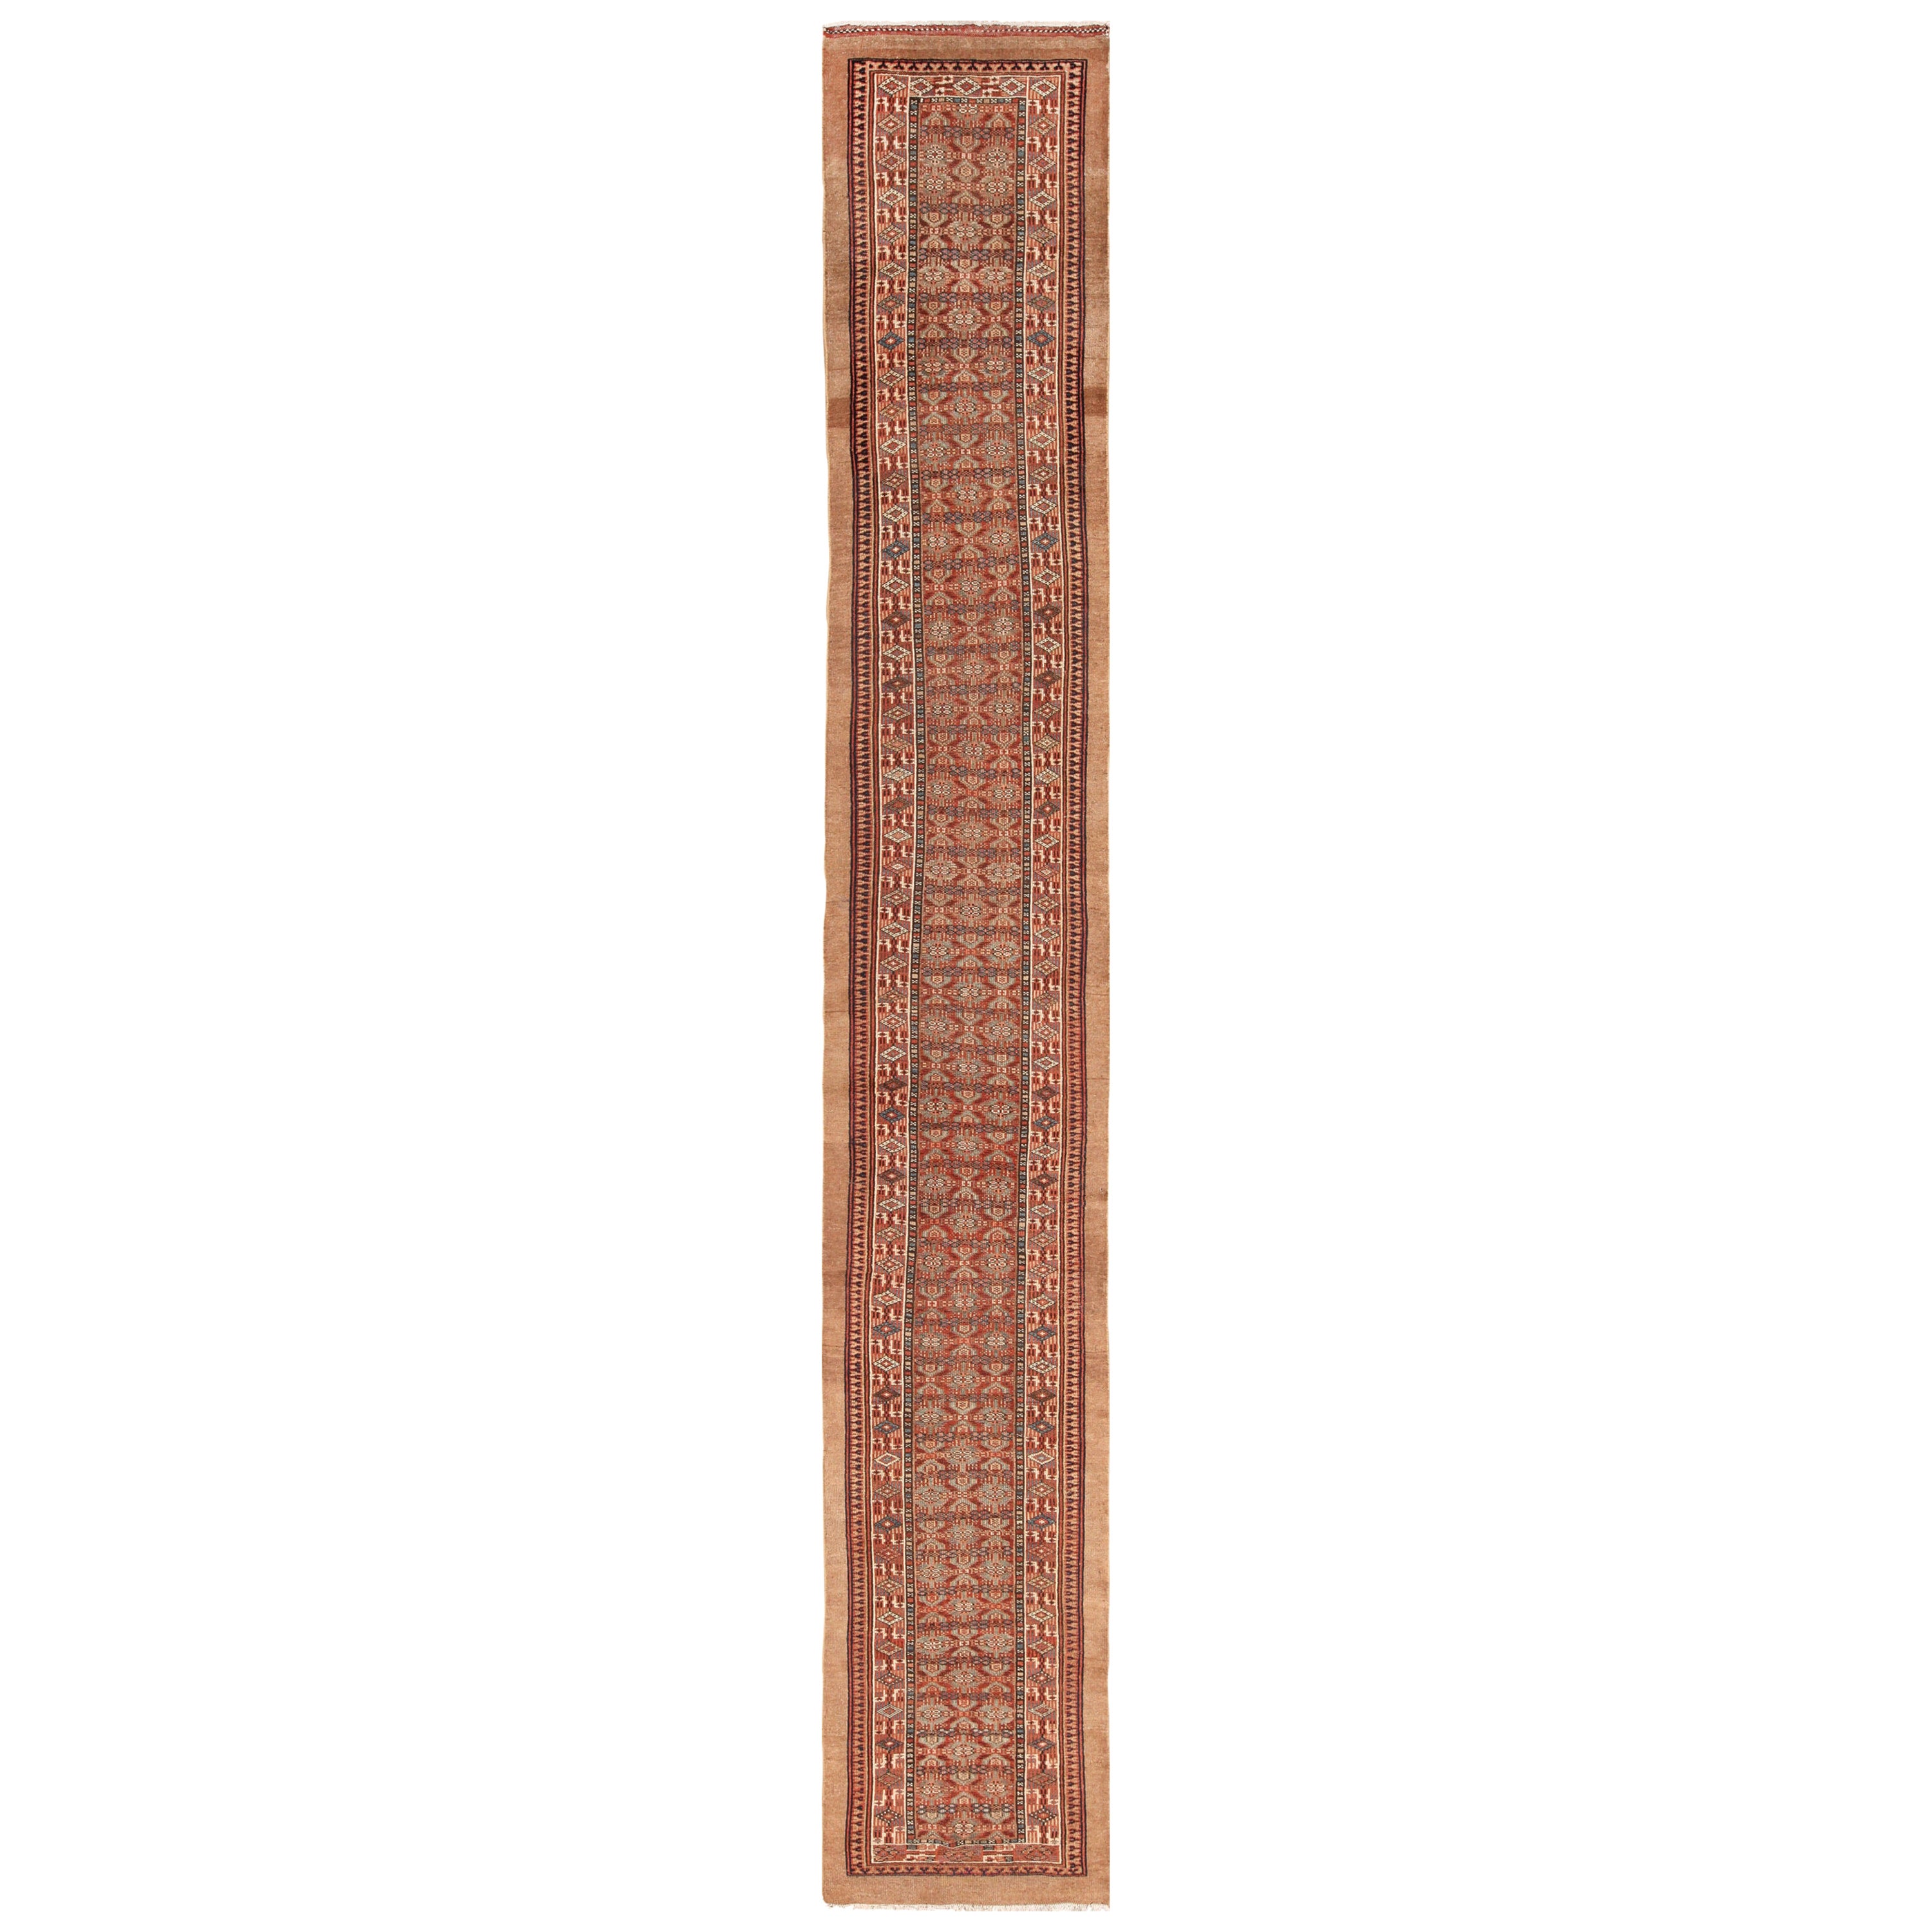 Tribal Long and Narrow Antique Persian Serab Runner Rug. Size: 2 ft 8 in x 16 ft